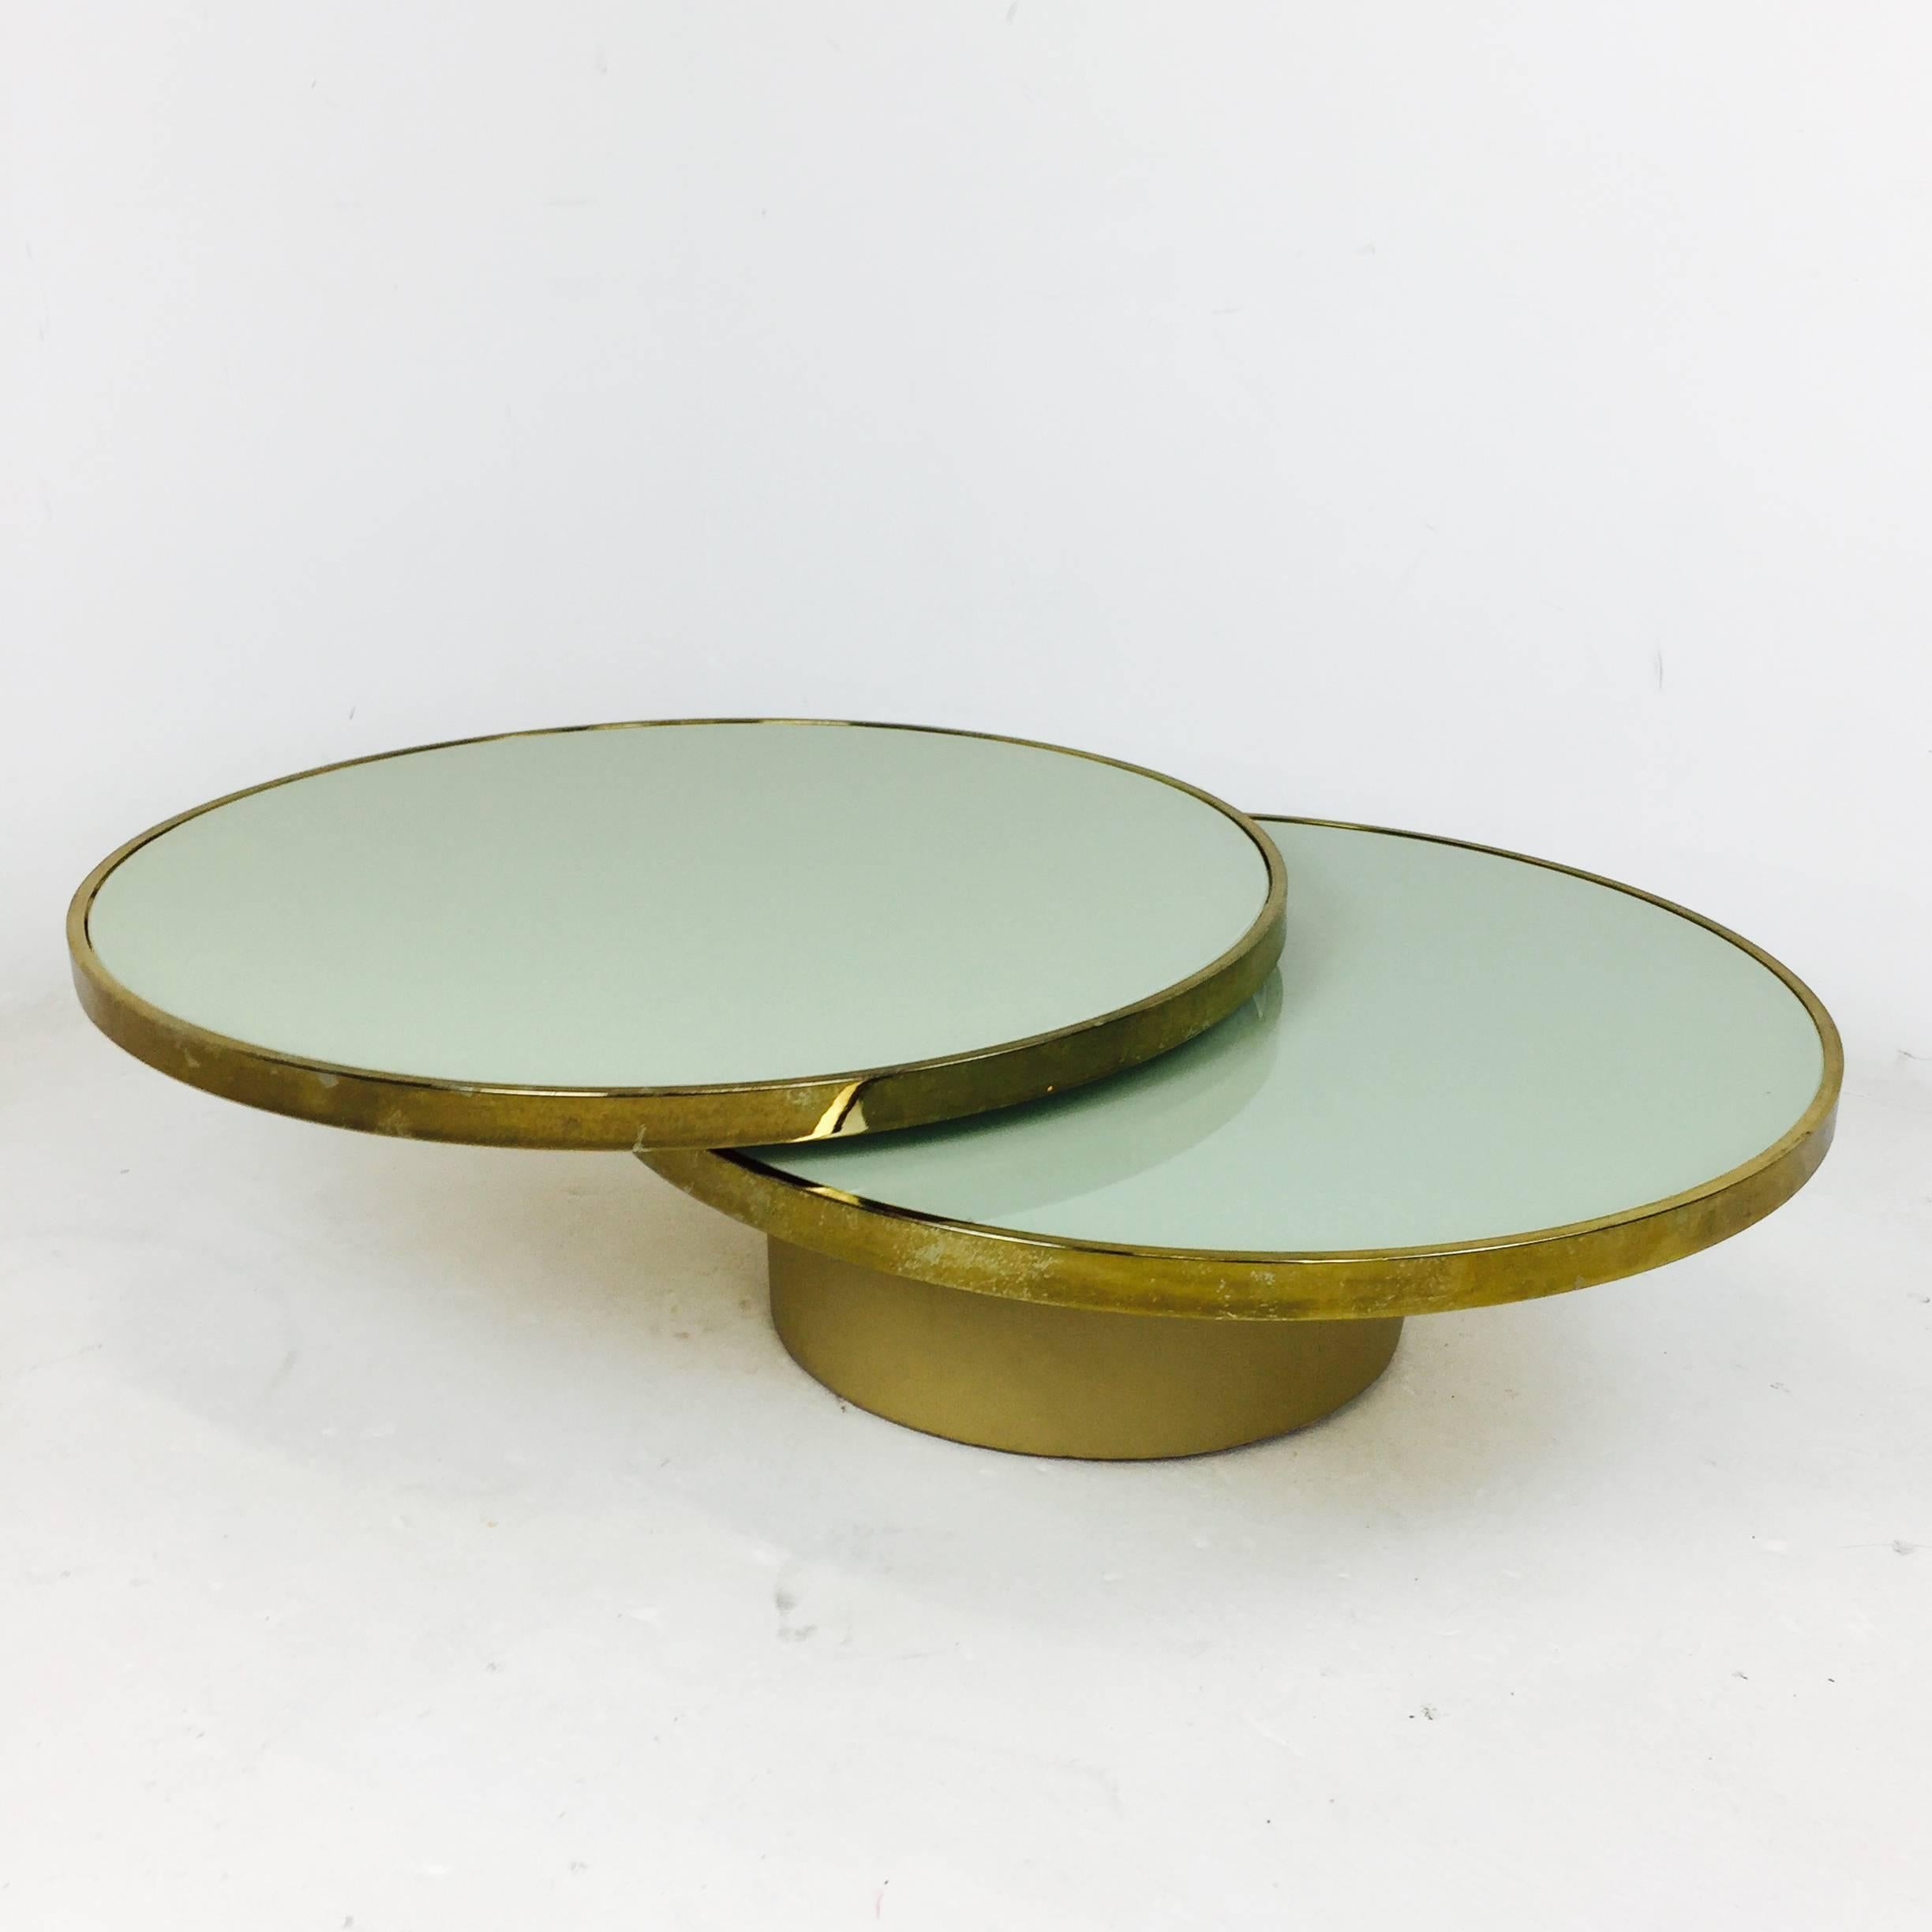 Rotating or swivel brass and frosted glass coffee table by Design Institute of America. The base is covered in cream vinyl. The glass is cracked on the lower portion of the table and the brass needs to be re-plated. 

Dimensions: 36